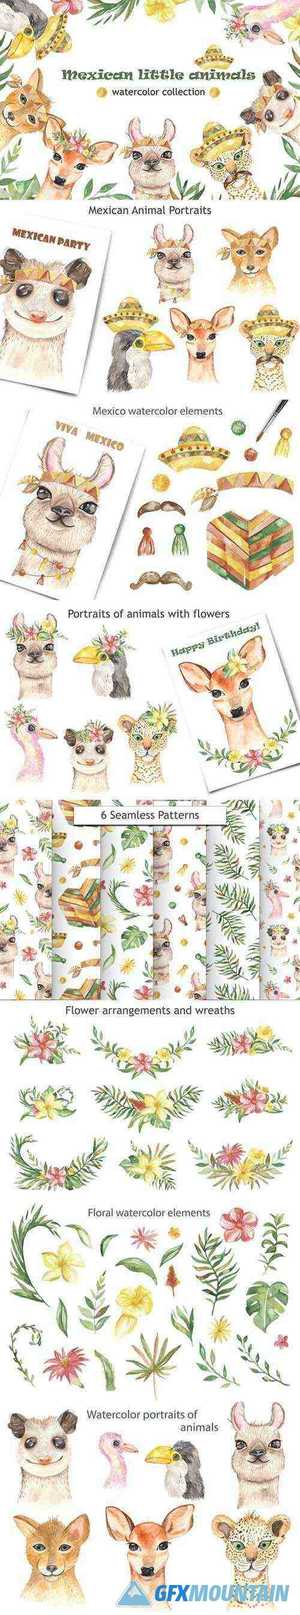 Watercolor Mexican little animals